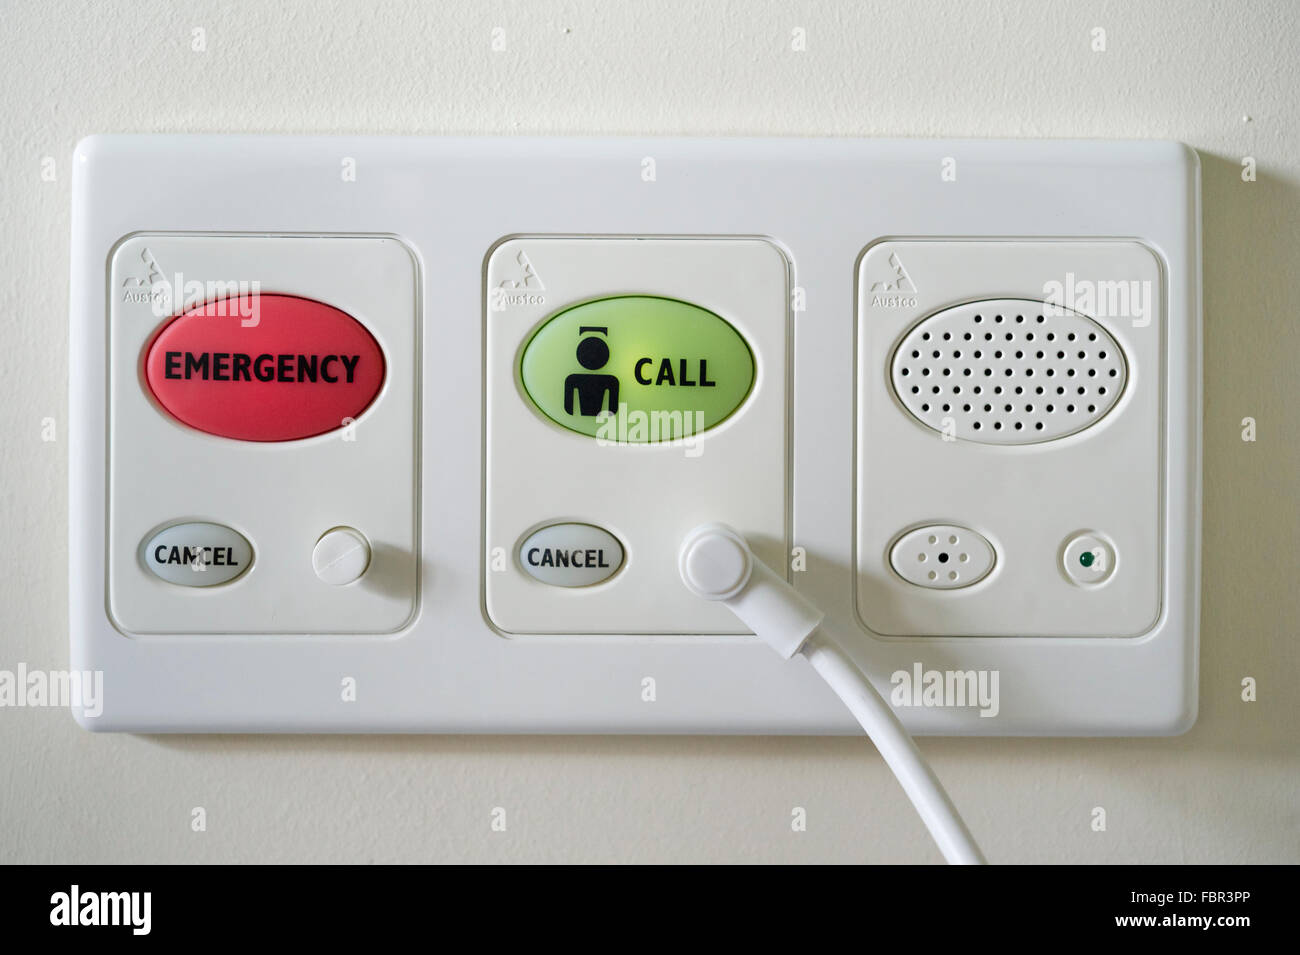 Emergency call button at a hospital Stock Photo